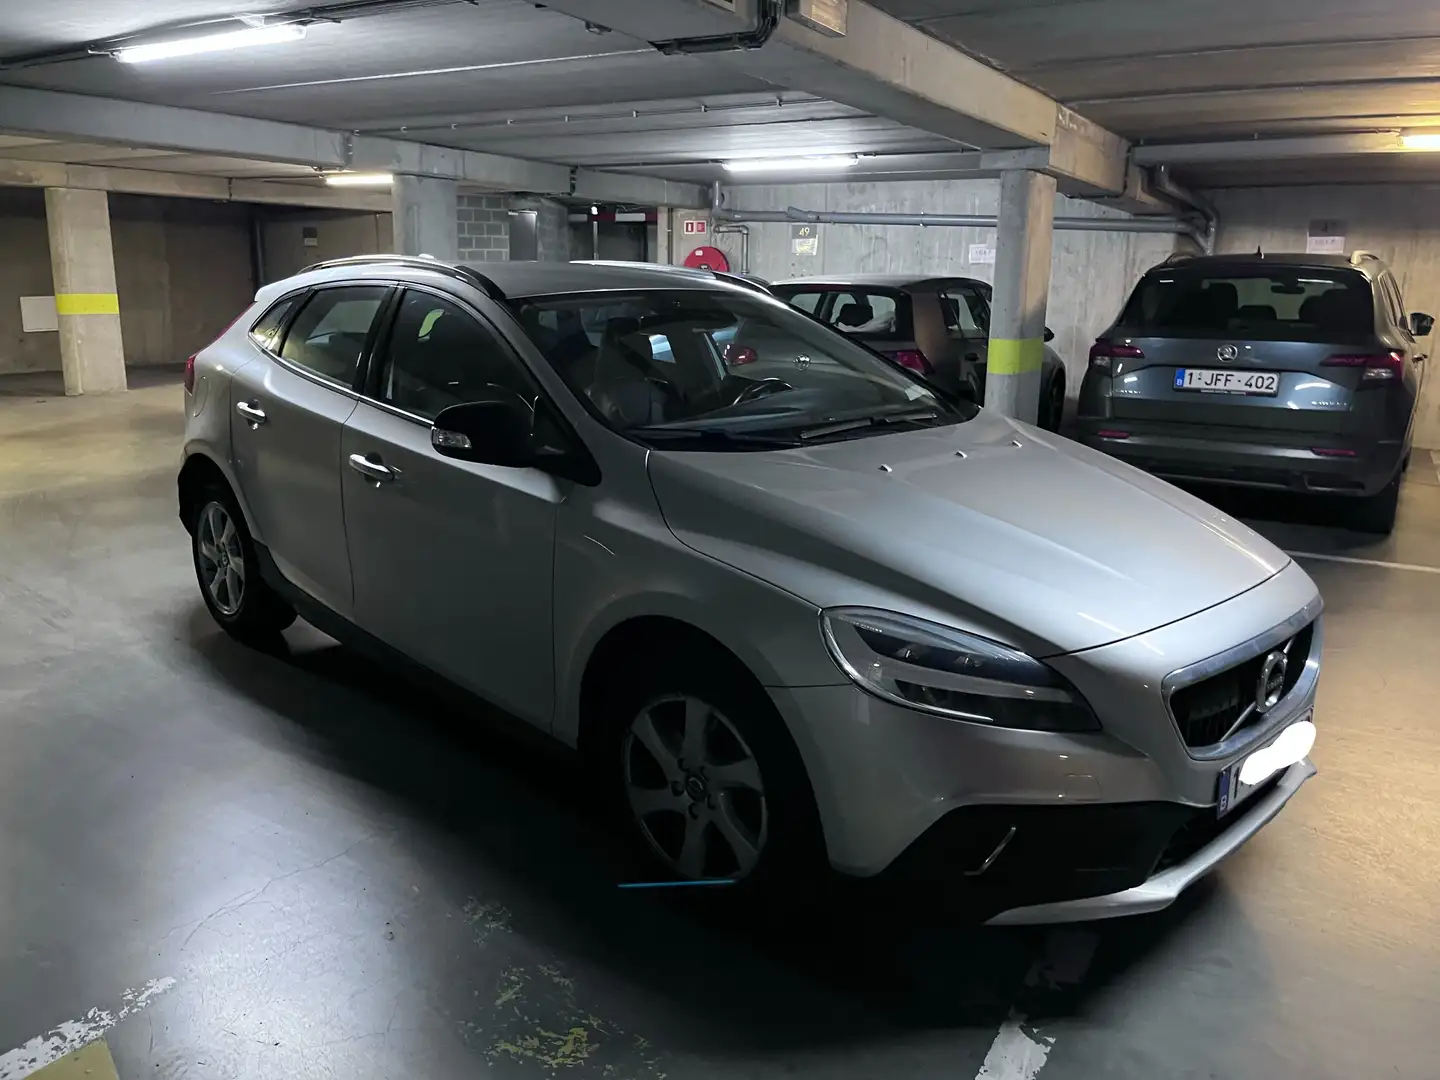 Volvo V40 Cross Country 2.0 D2 Momentum Geartronic - 1